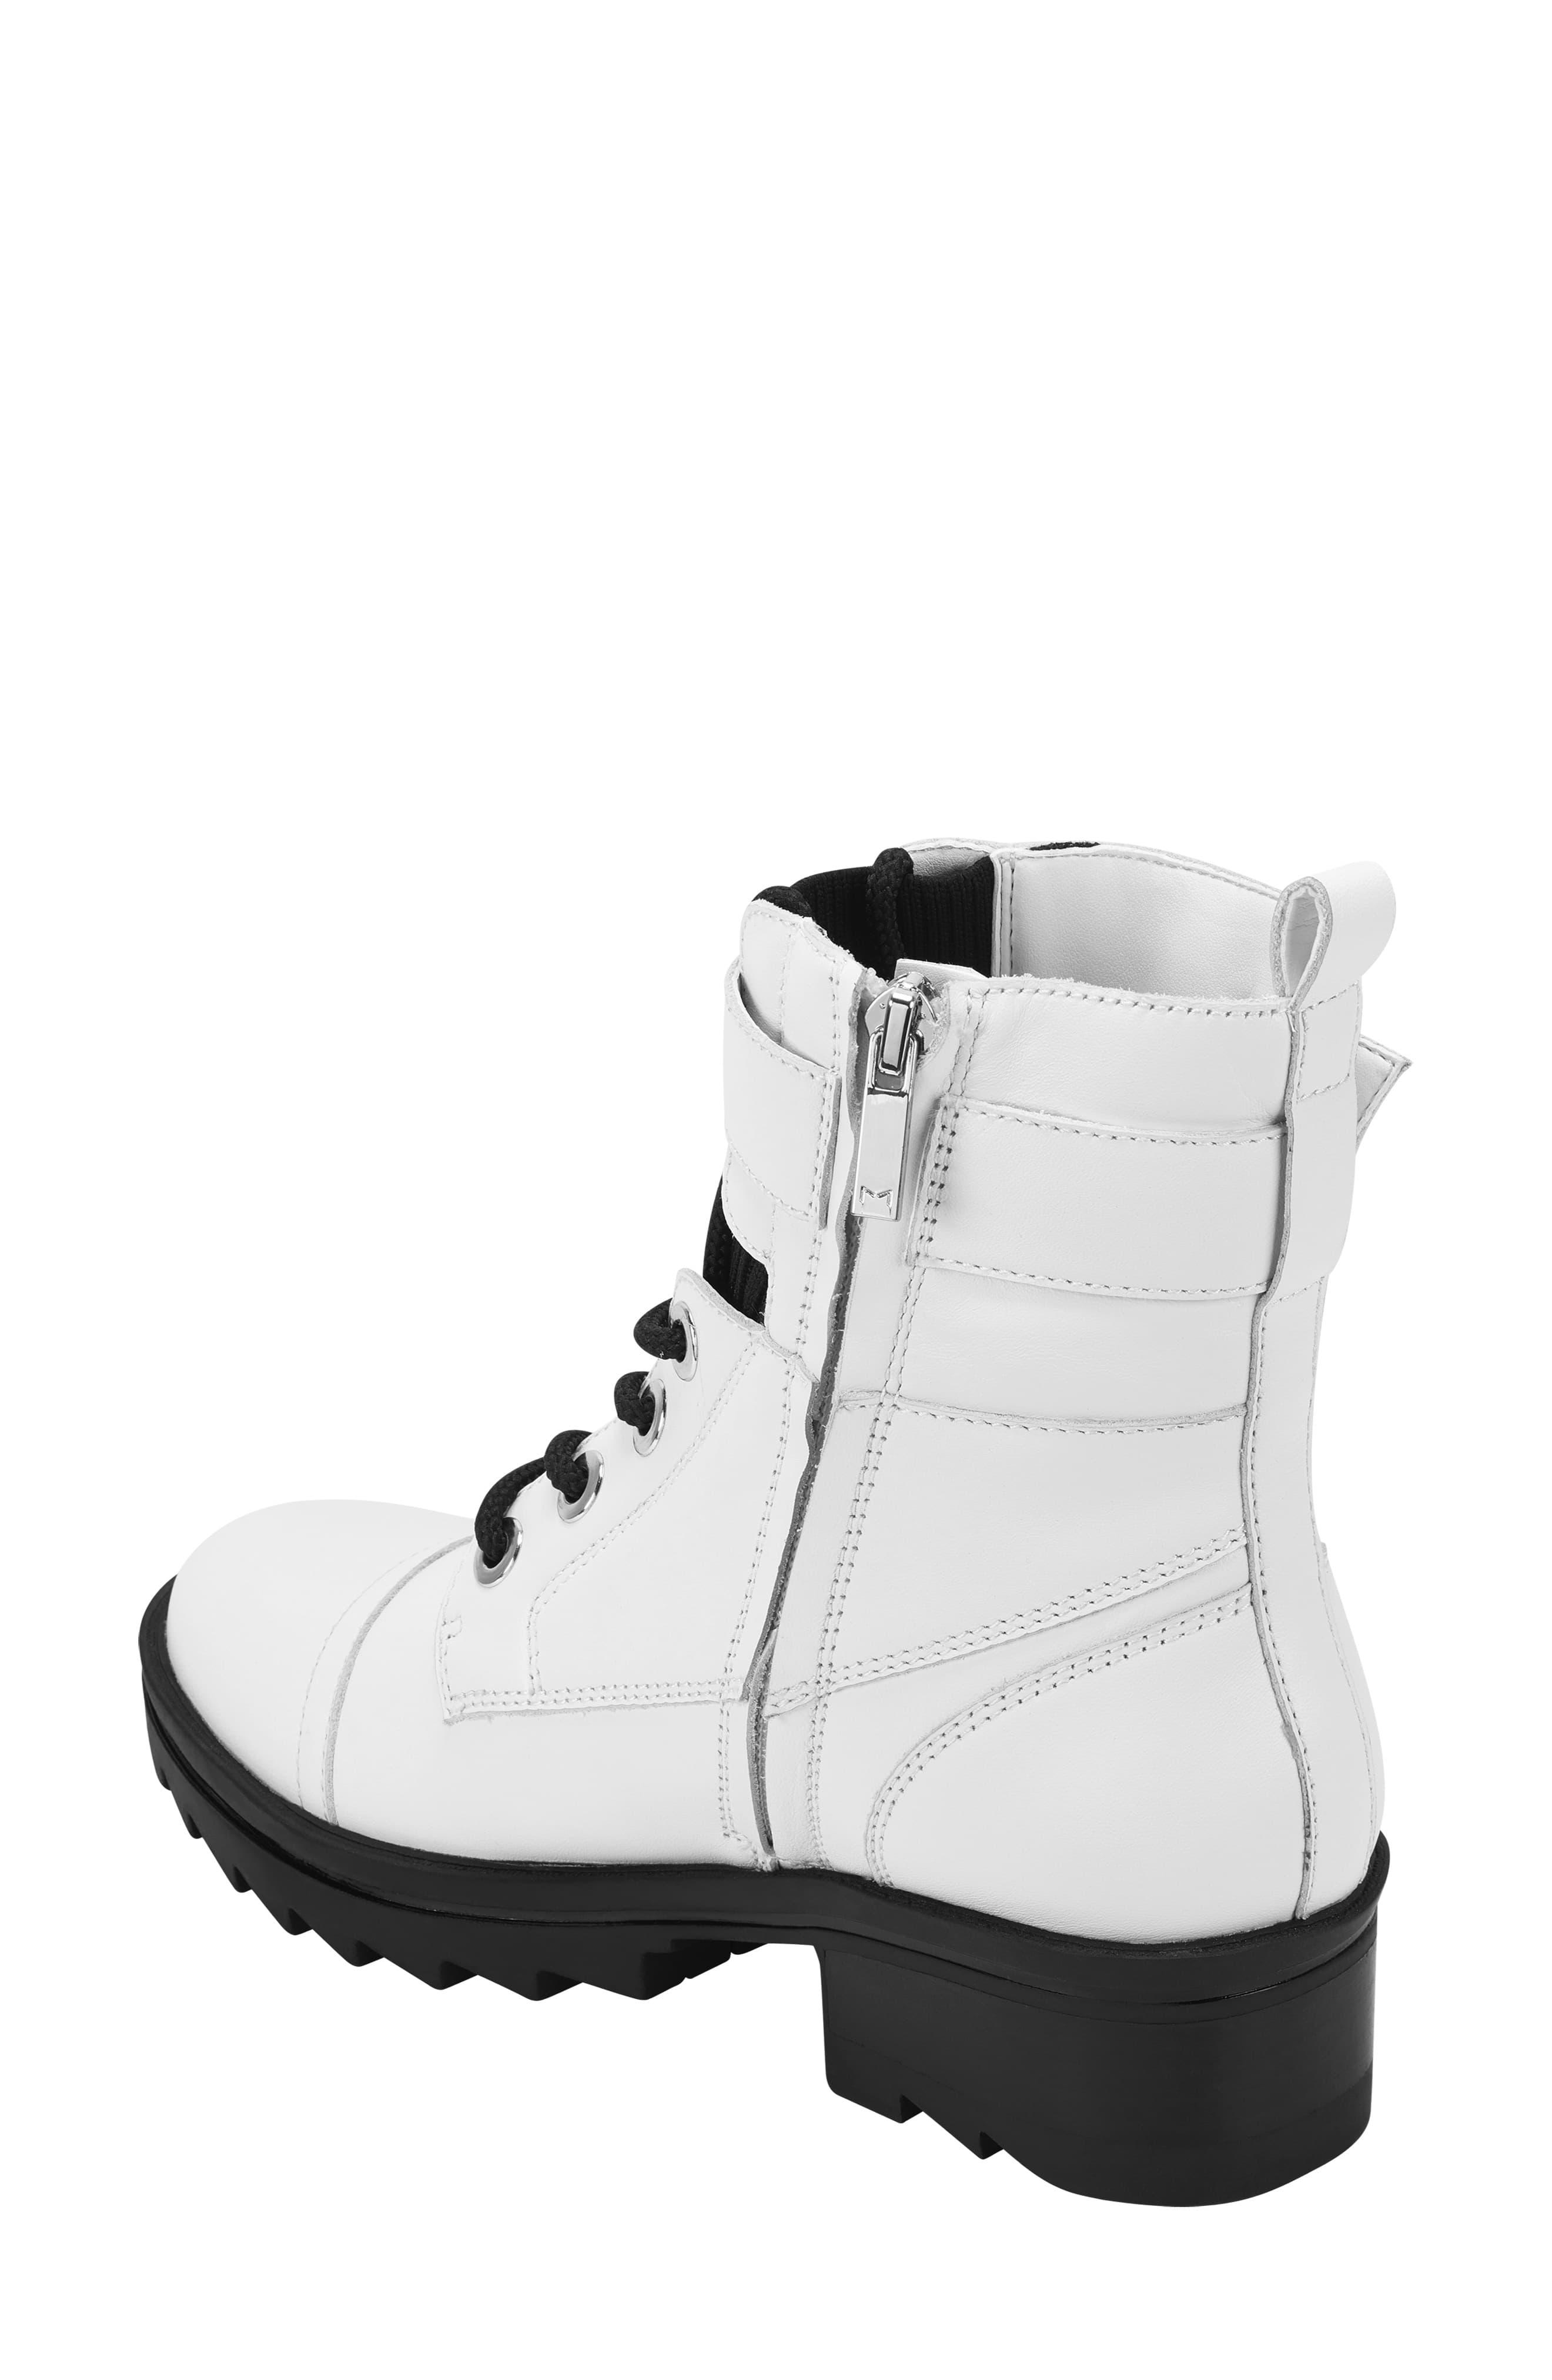 Marc Fisher Bristyn Combat Boot in Ivory Leather (White